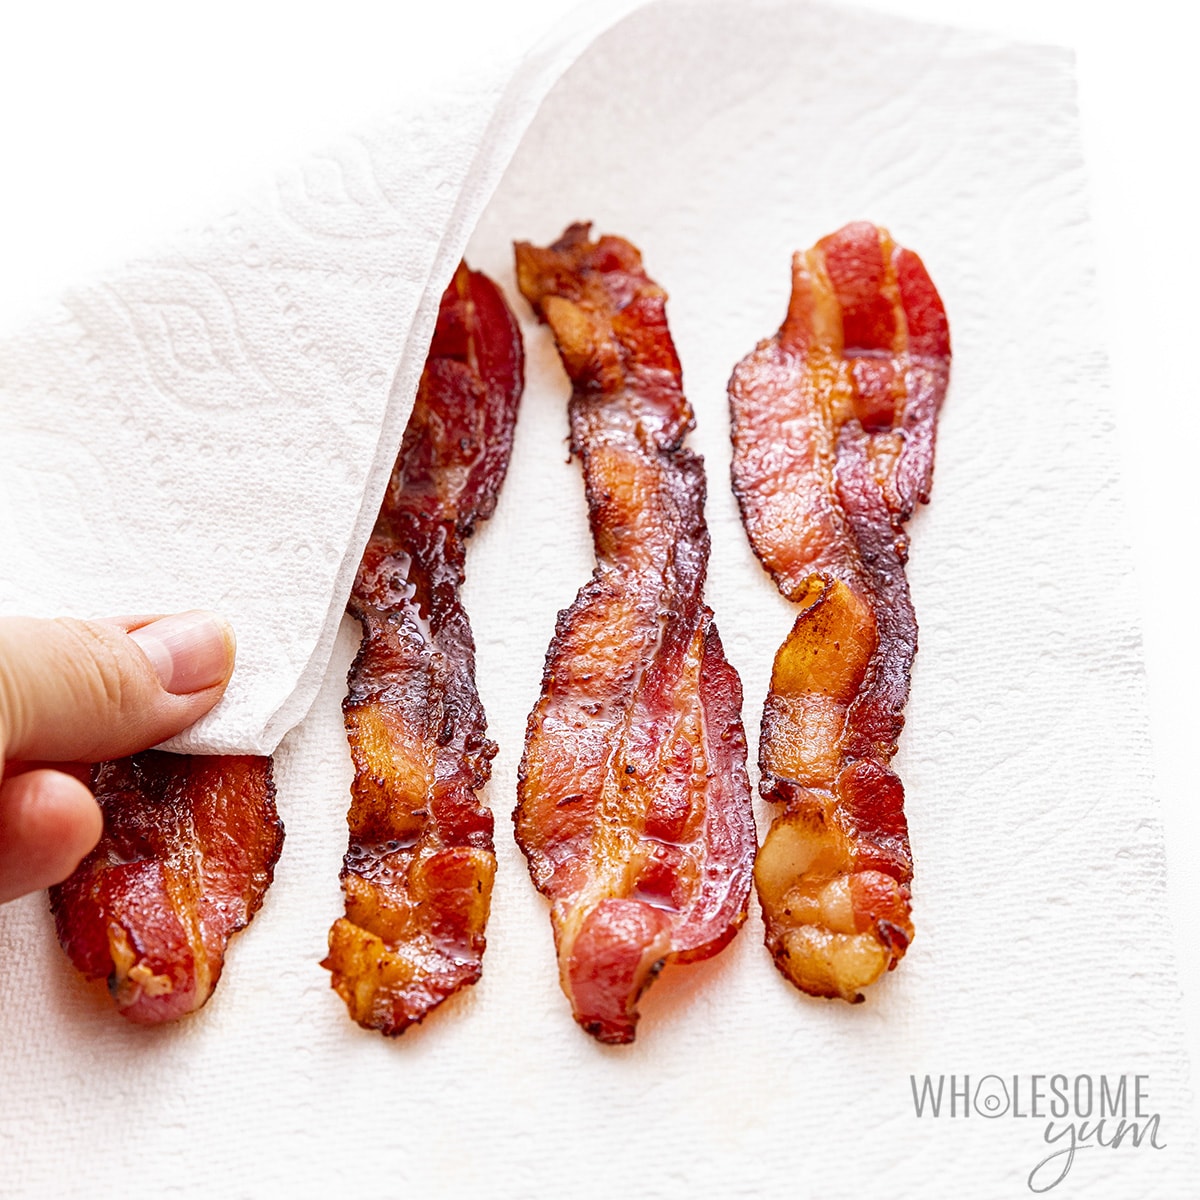 Place cooked bacon on paper towels.